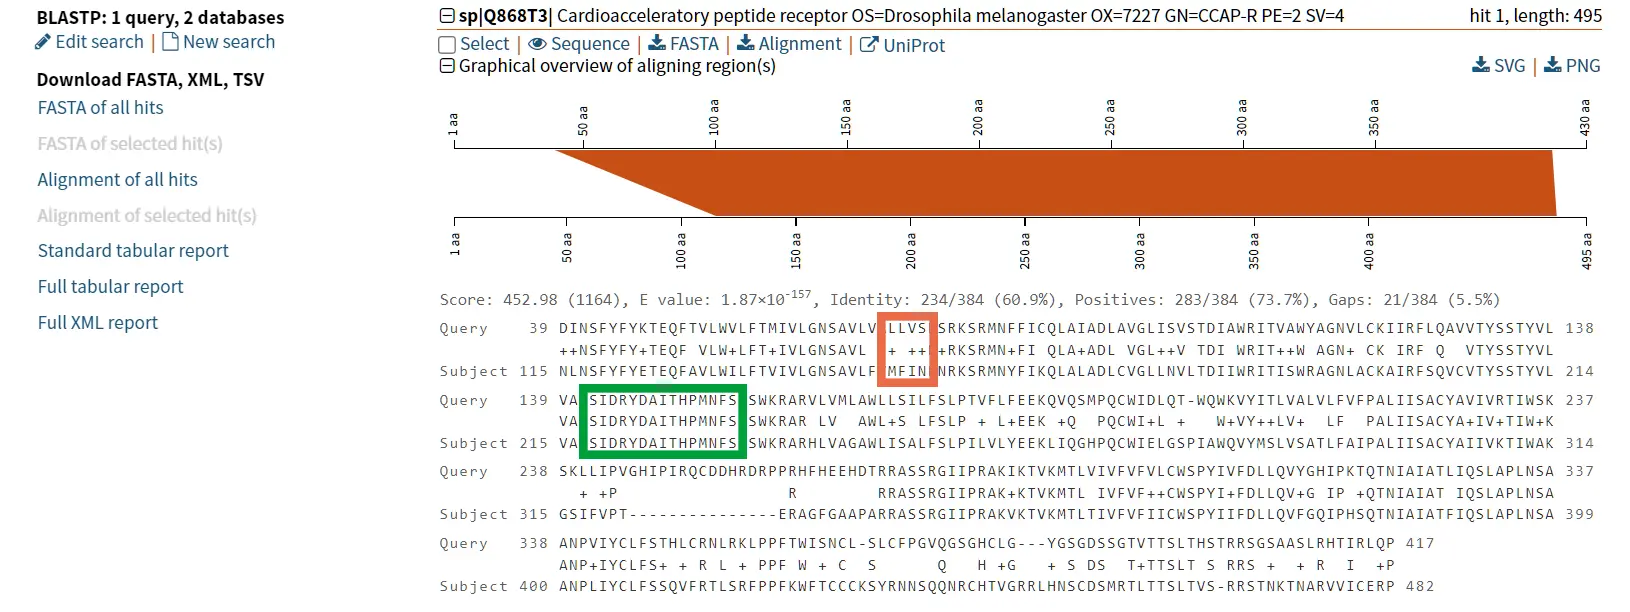 The figure shows an alignment between two cardioactive peptides (CCAP) receptors. In the generated alignment, identity is highlighted in green and similarity is highlighted in orange. + indicates similar amino acids